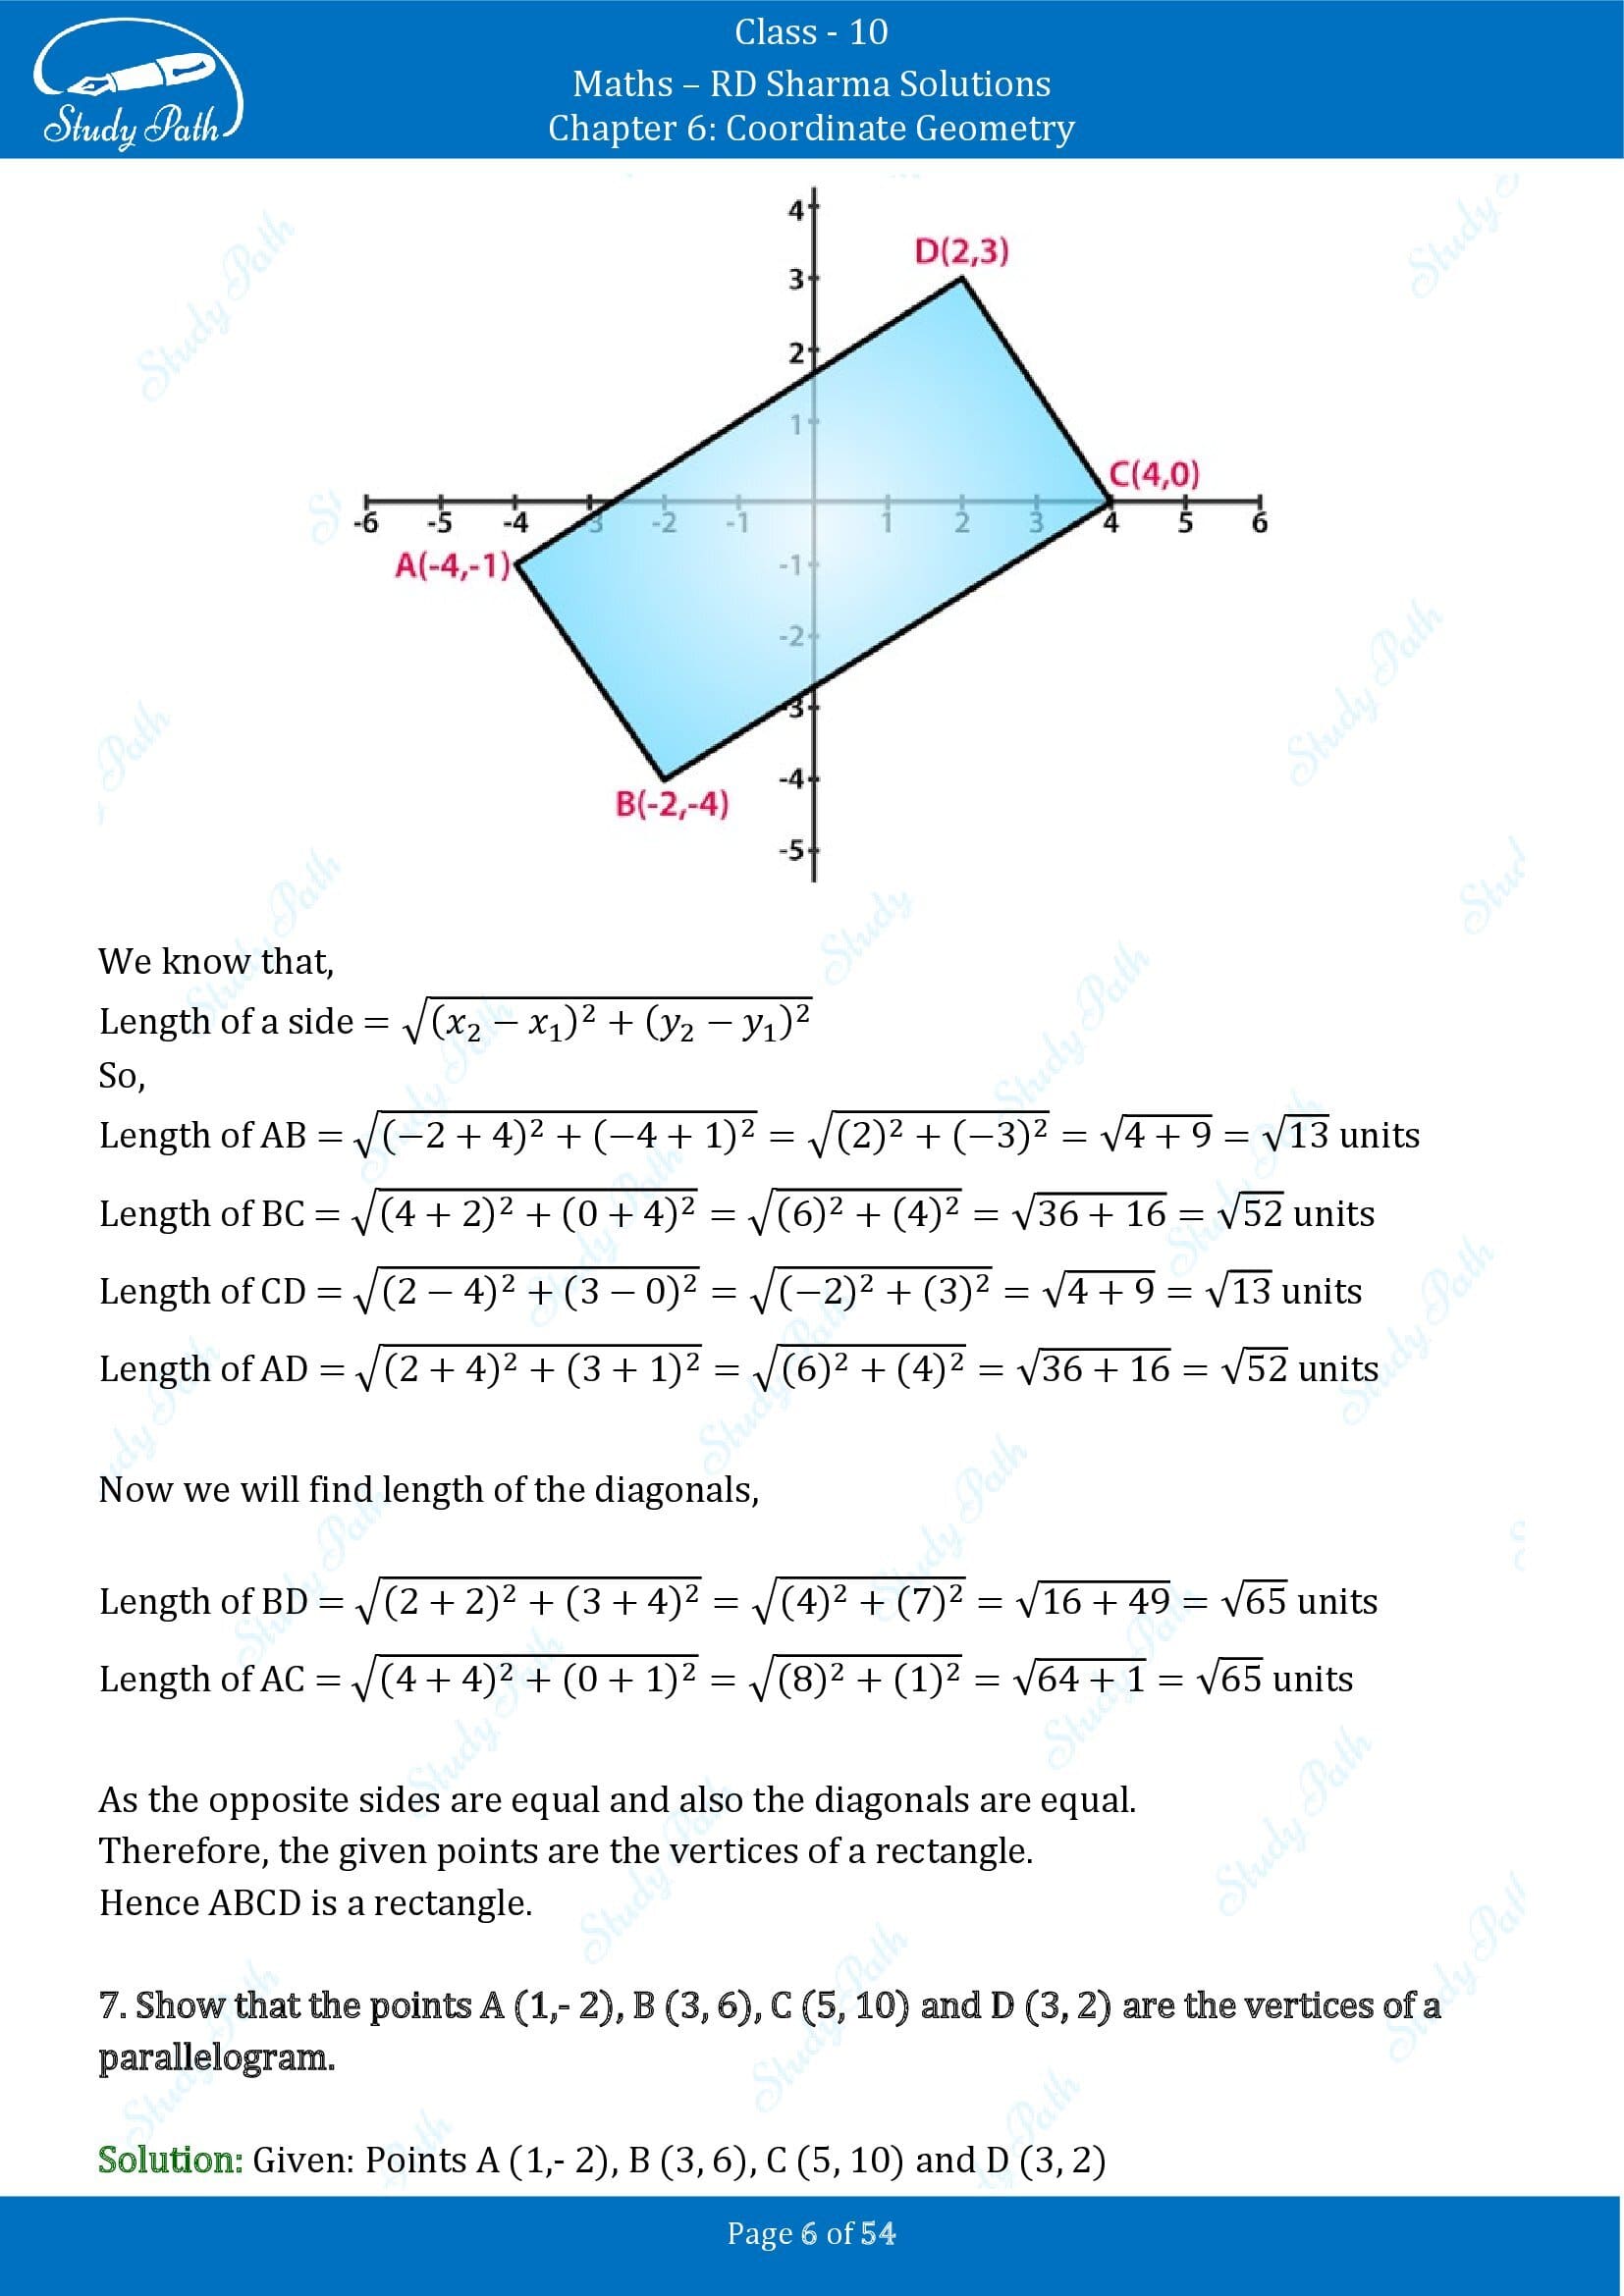 RD Sharma Solutions Class 10 Chapter 6 Coordinate Geometry Exercise 6.2 0006